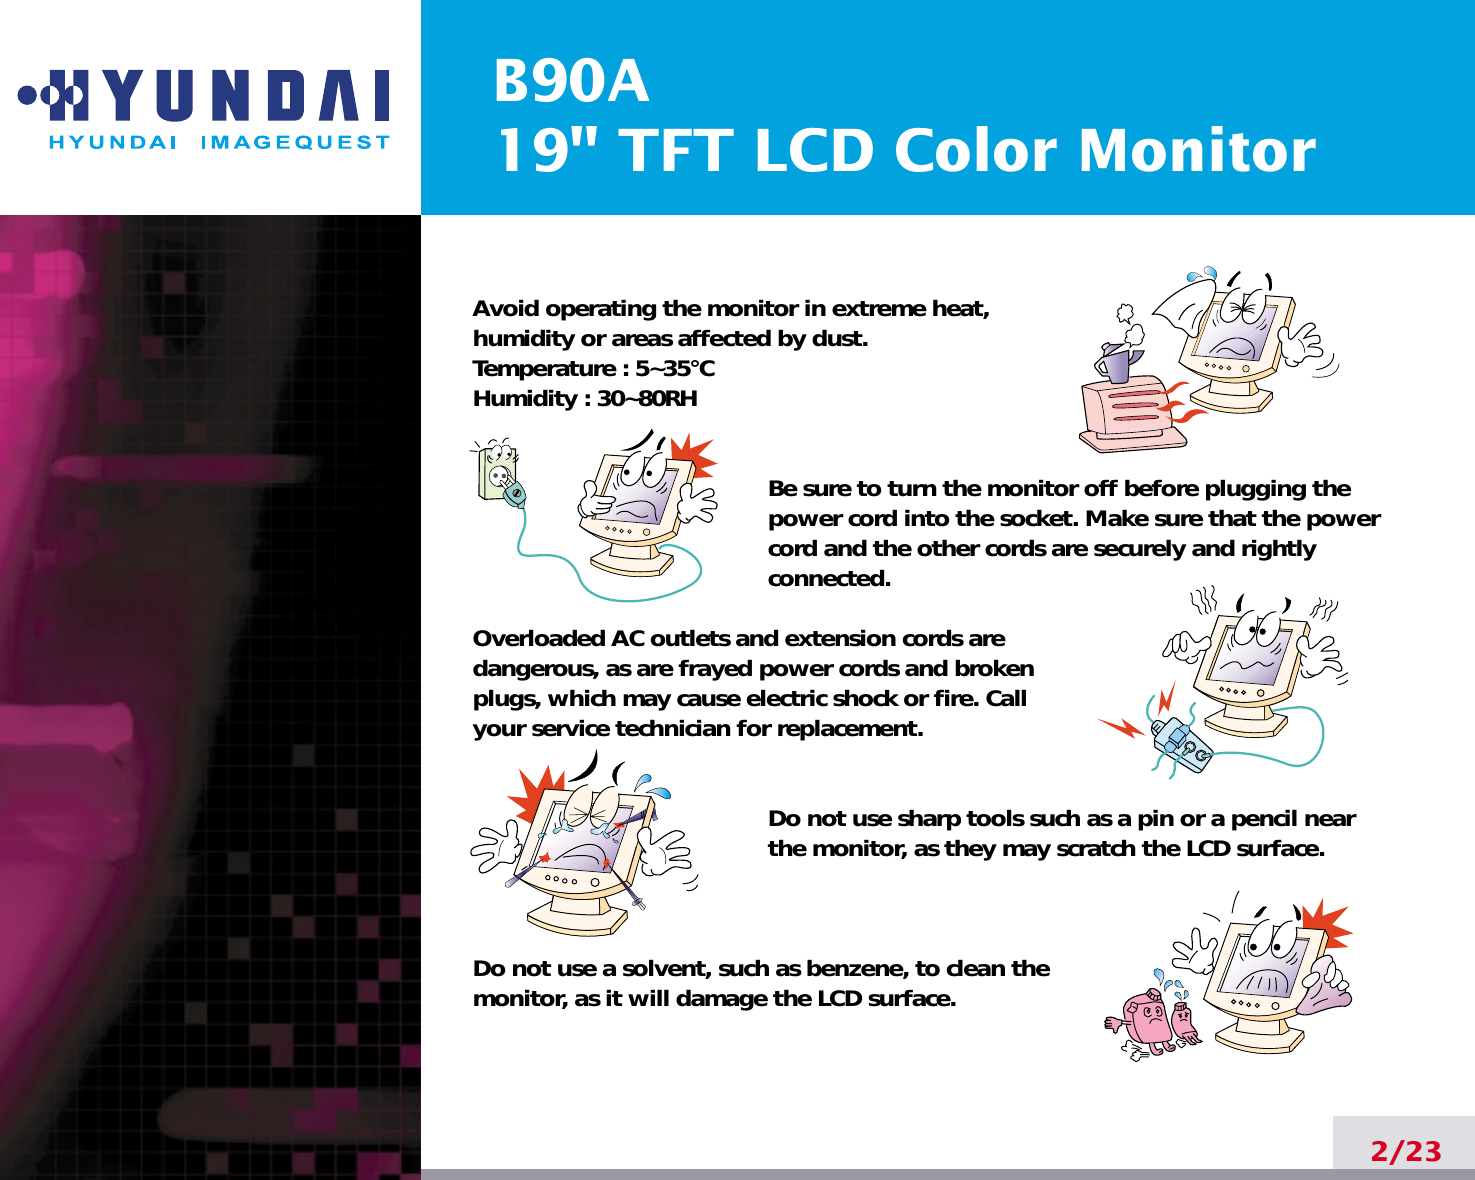 B90A19&quot; TFT LCD Color Monitor2/23Avoid operating the monitor in extreme heat, humidity or areas affected by dust. Temperature : 5~35°CHumidity : 30~80RH Be sure to turn the monitor off before plugging thepower cord into the socket. Make sure that the powercord and the other cords are securely and rightlyconnected.Overloaded AC outlets and extension cords are dangerous, as are frayed power cords and broken plugs, which may cause electric shock or fire. Call your service technician for replacement.Do not use sharp tools such as a pin or a pencil near the monitor, as they may scratch the LCD surface.Do not use a solvent, such as benzene, to clean the monitor, as it will damage the LCD surface.